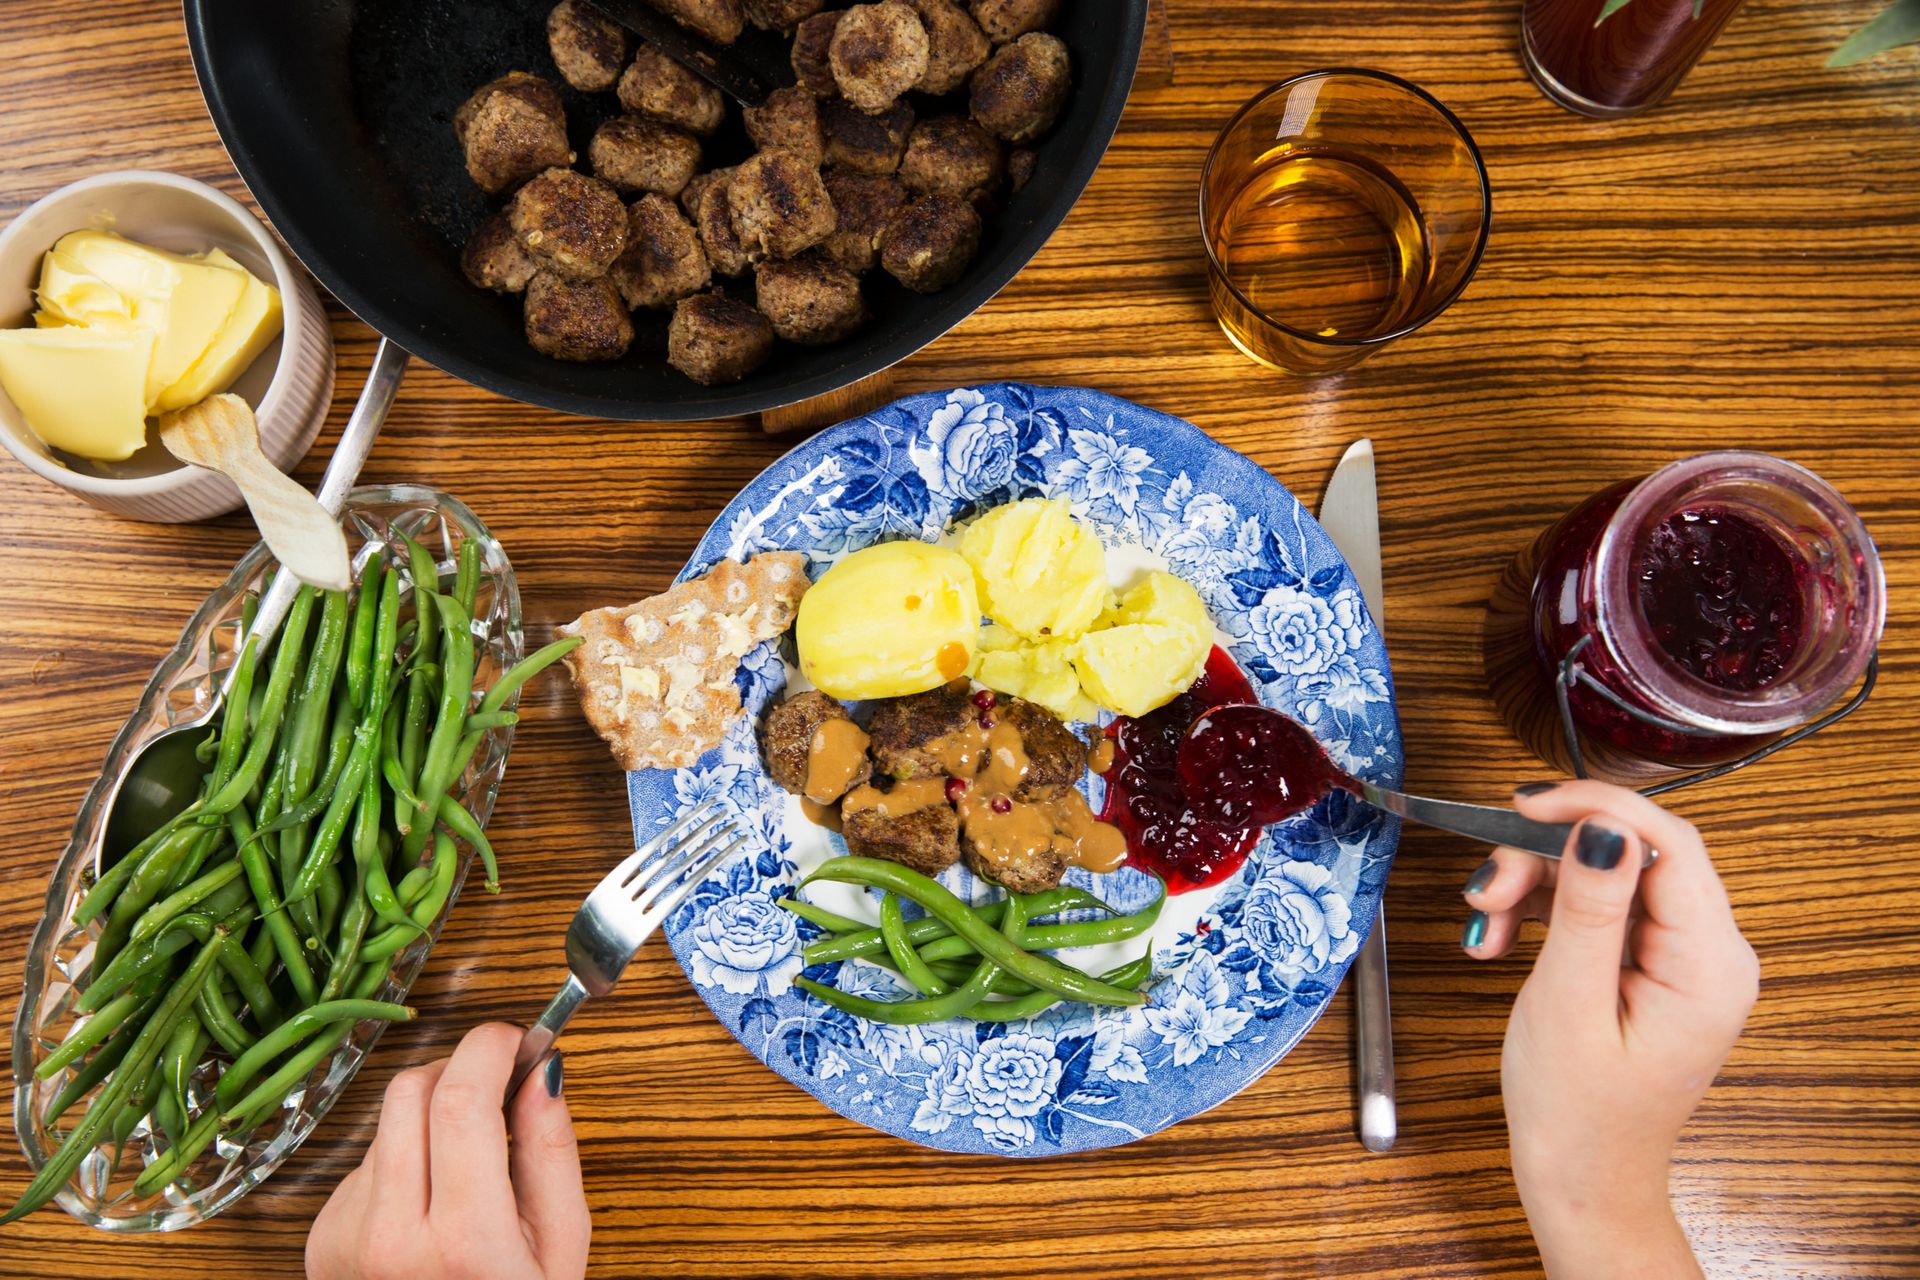 Swedish meatballs with green beans, mashed potatoes, and cranberry sauce. 